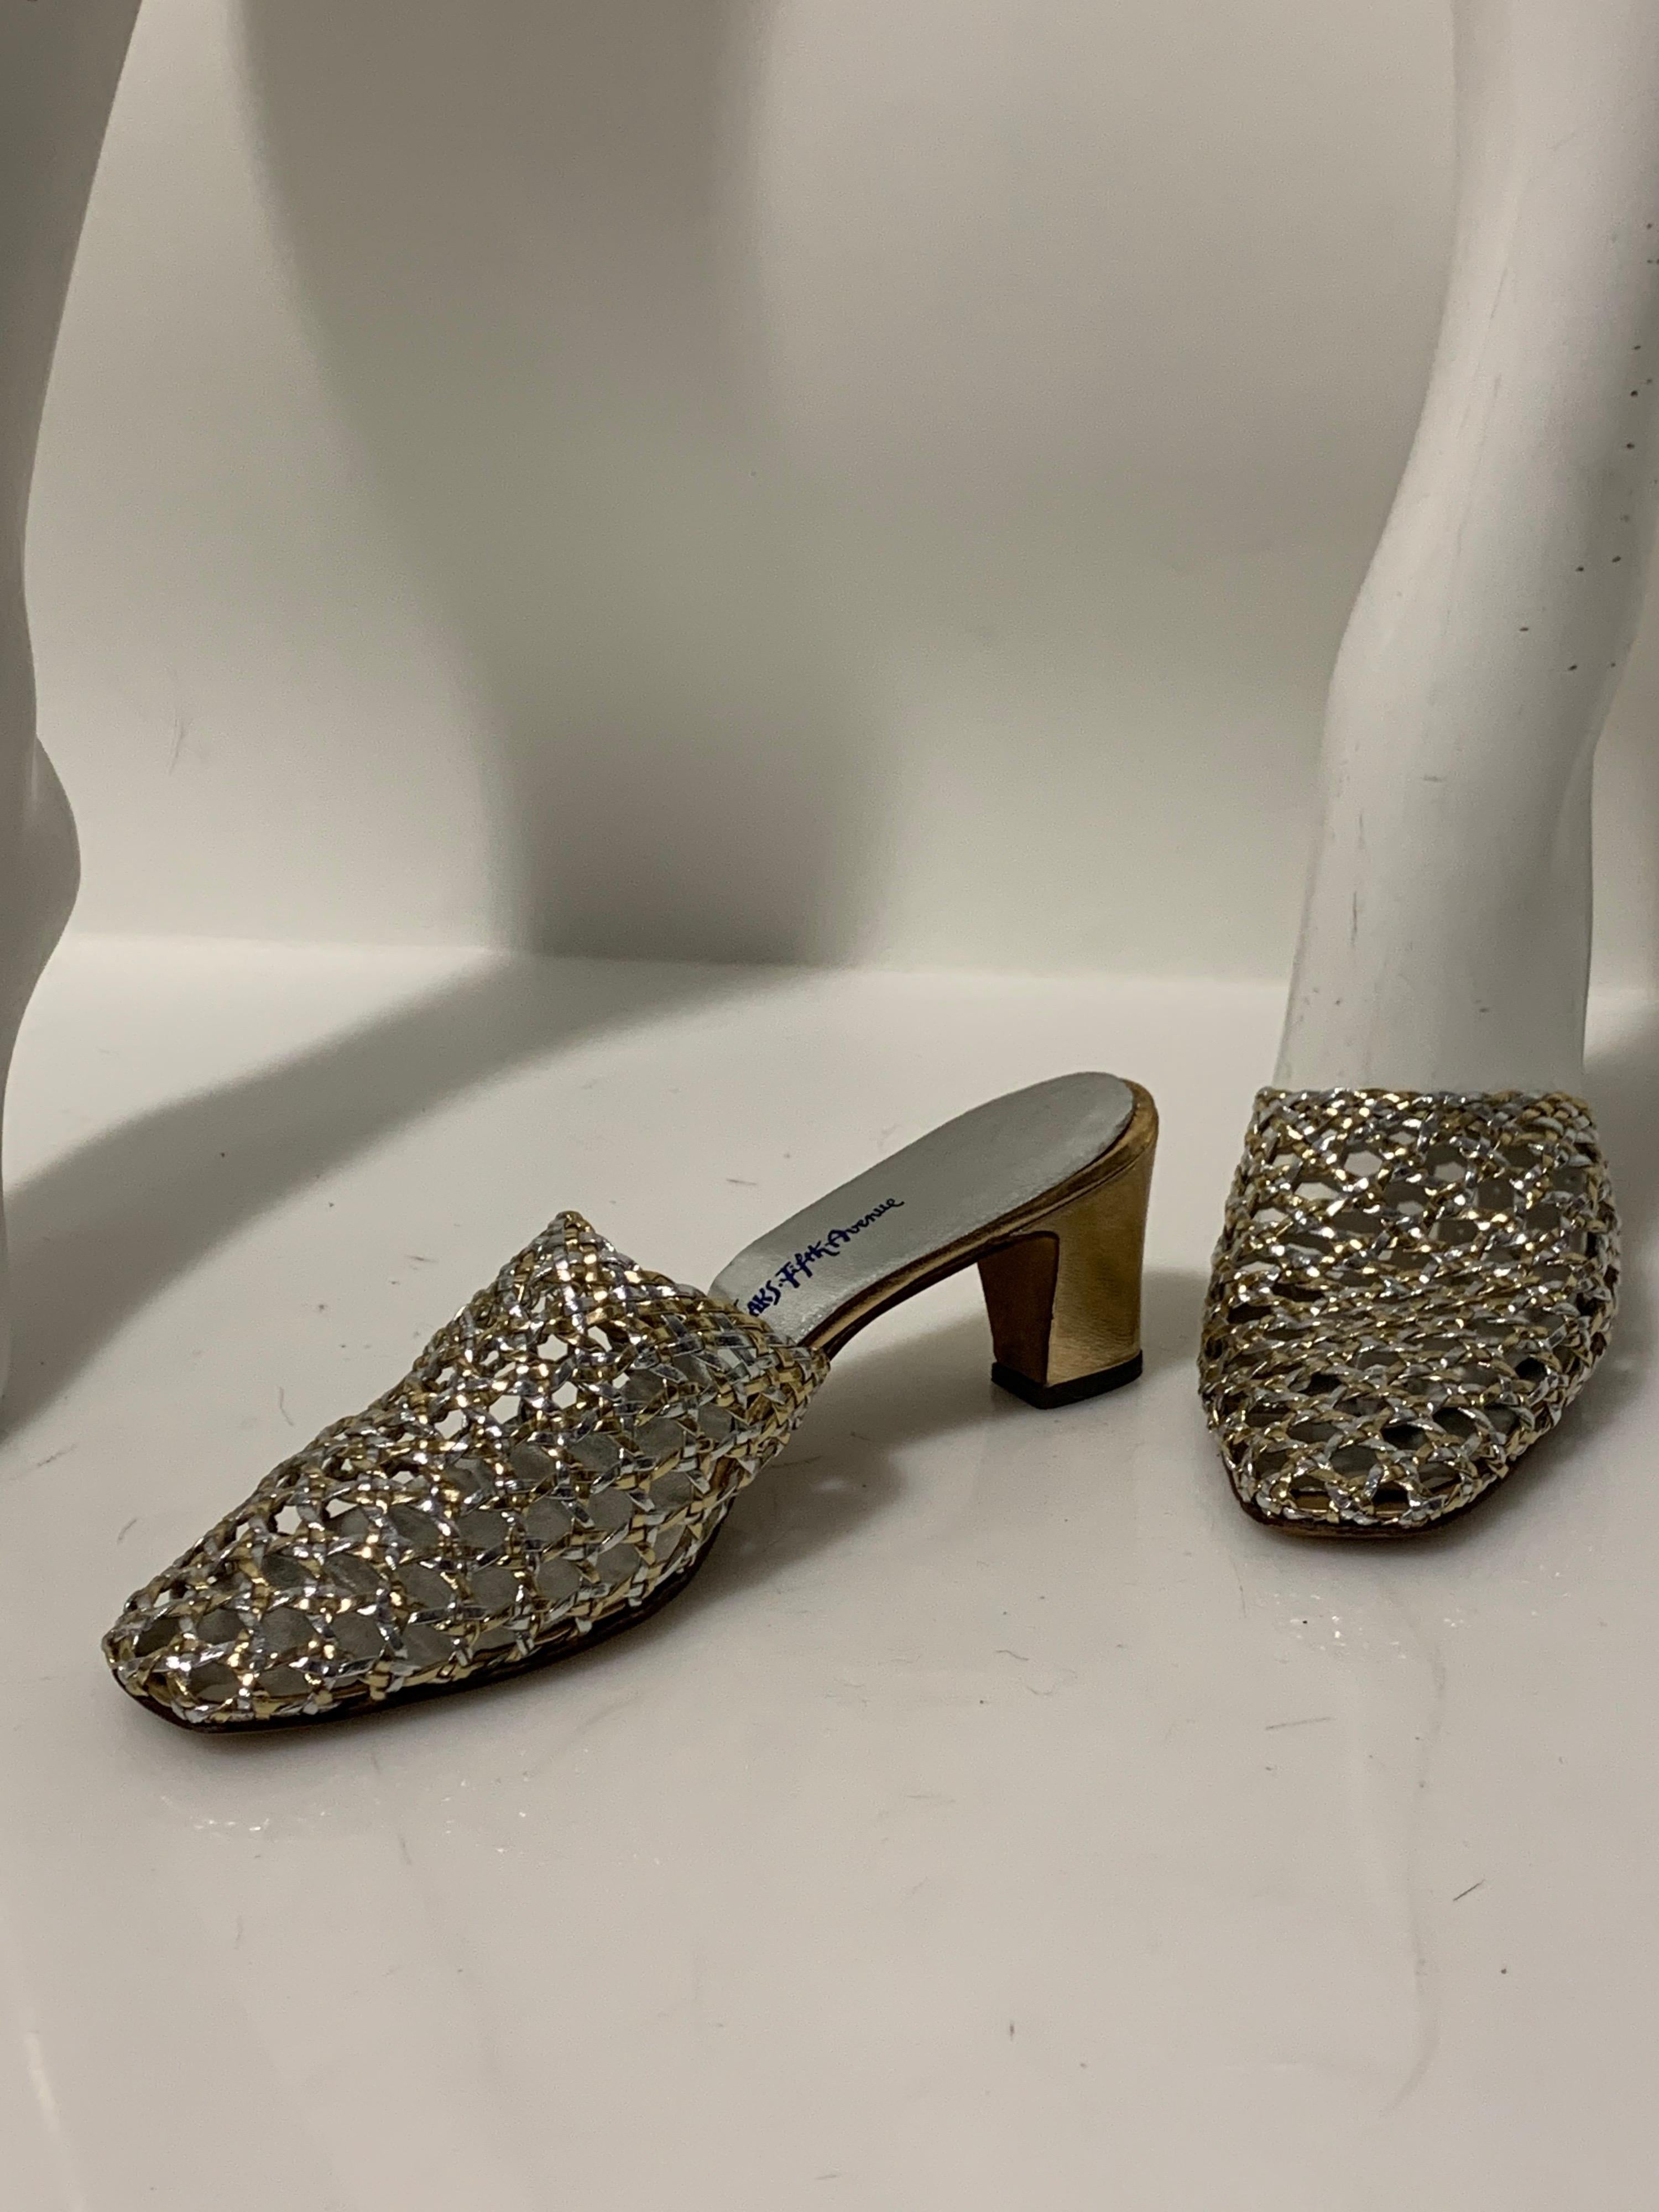 1960s Saks Fifth Avenue Mod mixed silver and gold basket-woven leather slide shoe. Open back with squared toe. Size 7.5M